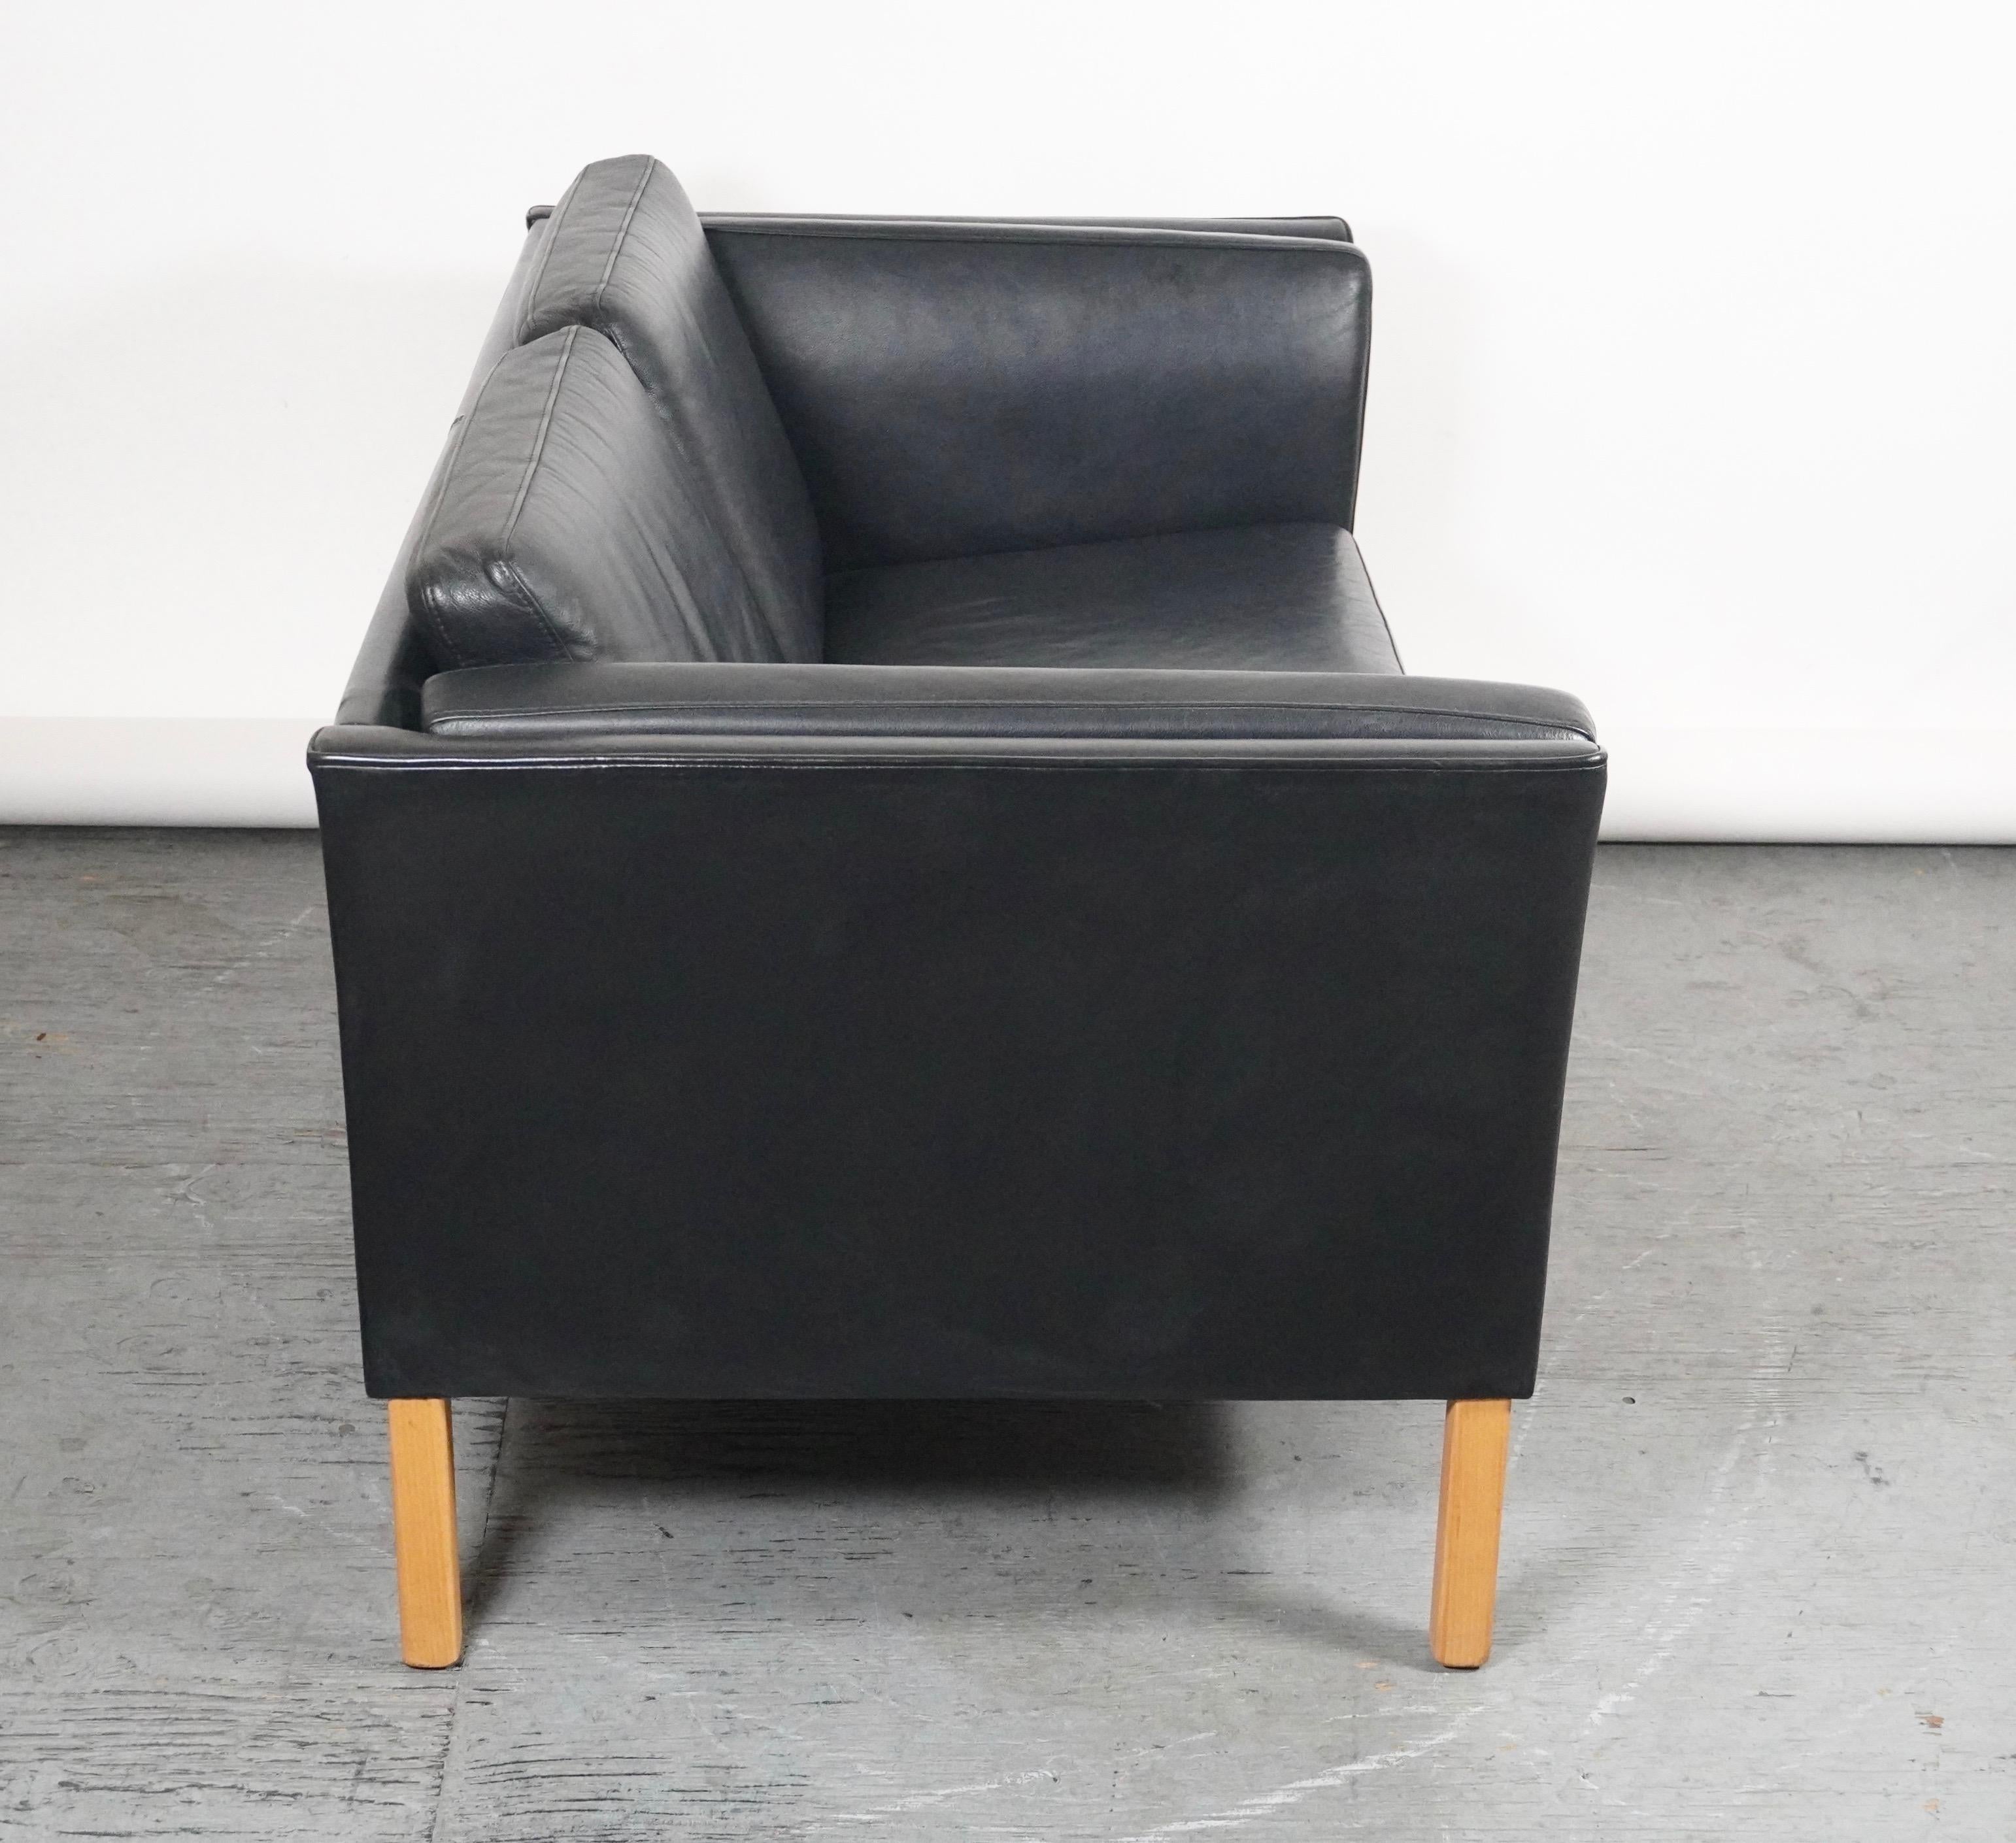 Hand-Crafted Black Lather Borge Mogensen Style Sofa / Settee by Stouby of Denmark